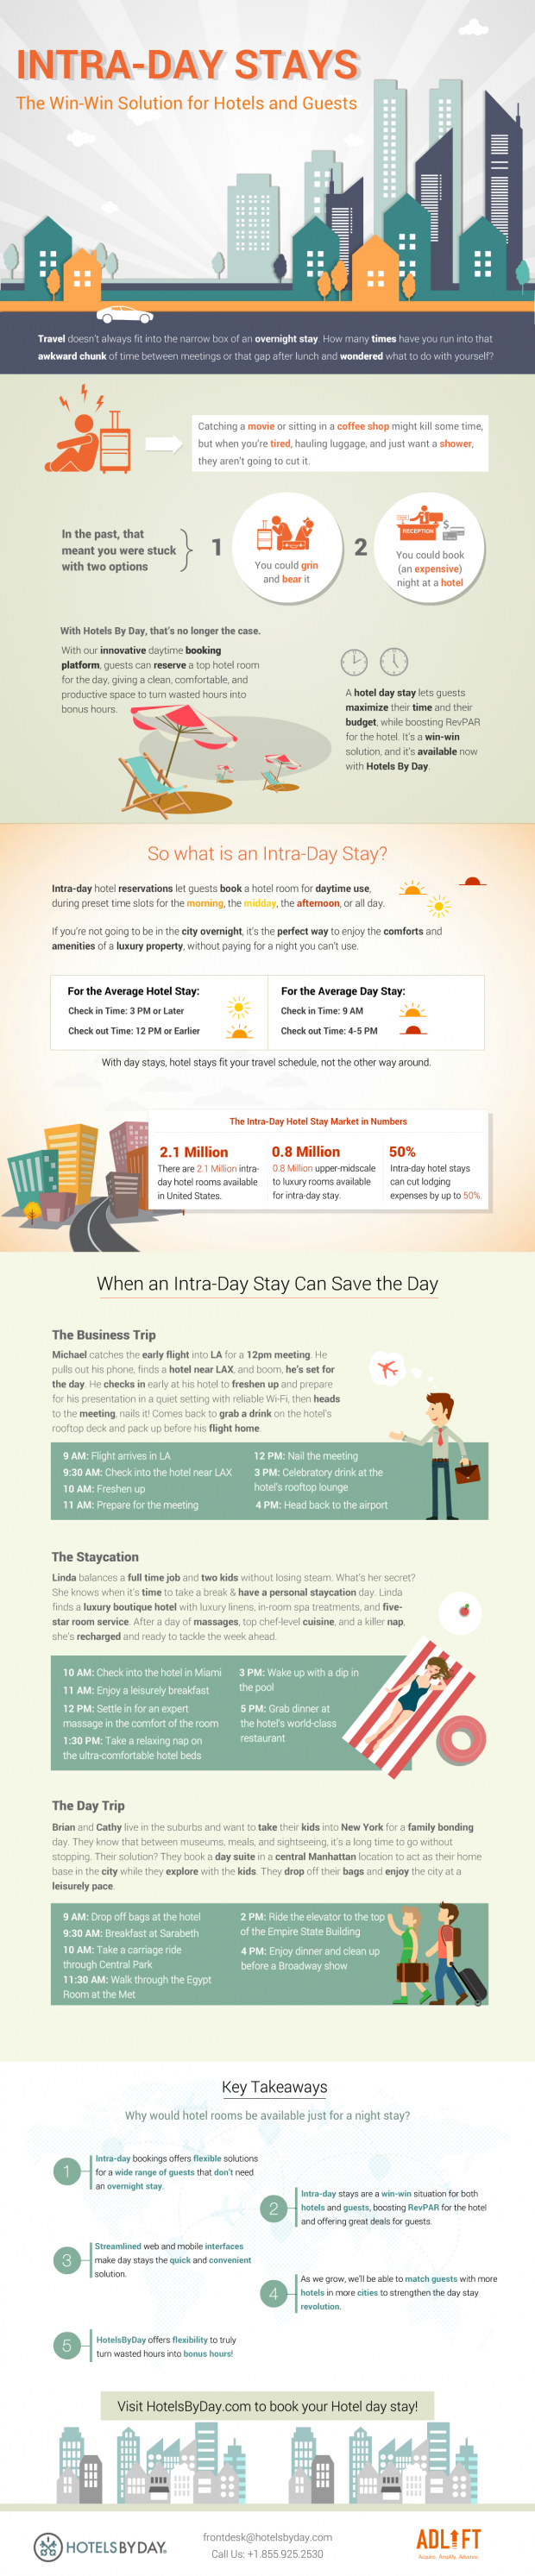 Intra-Day Stays: The Win-Win Solution for Hotels and Guests